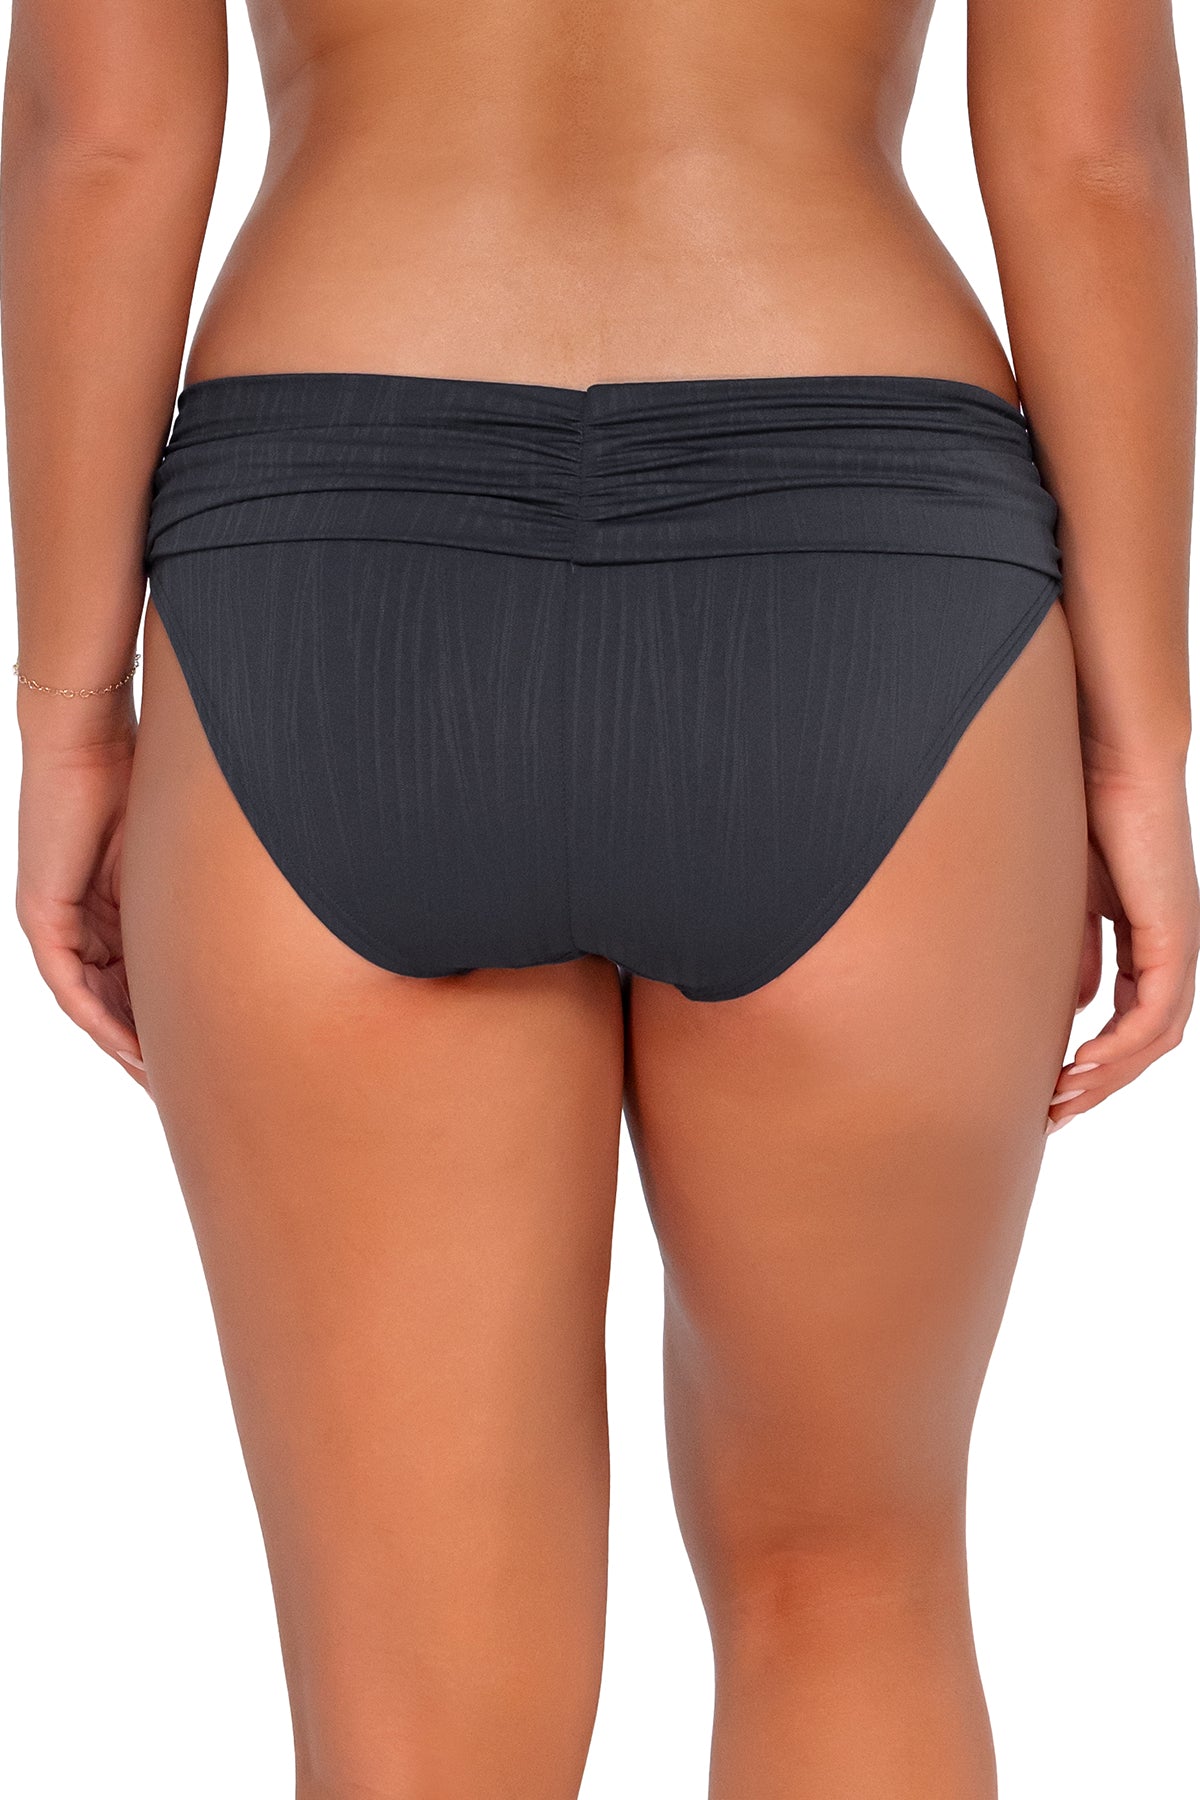 Back pose #1 of Taylor wearing Sunsets Slate Seagrass Texture Unforgettable Bottom